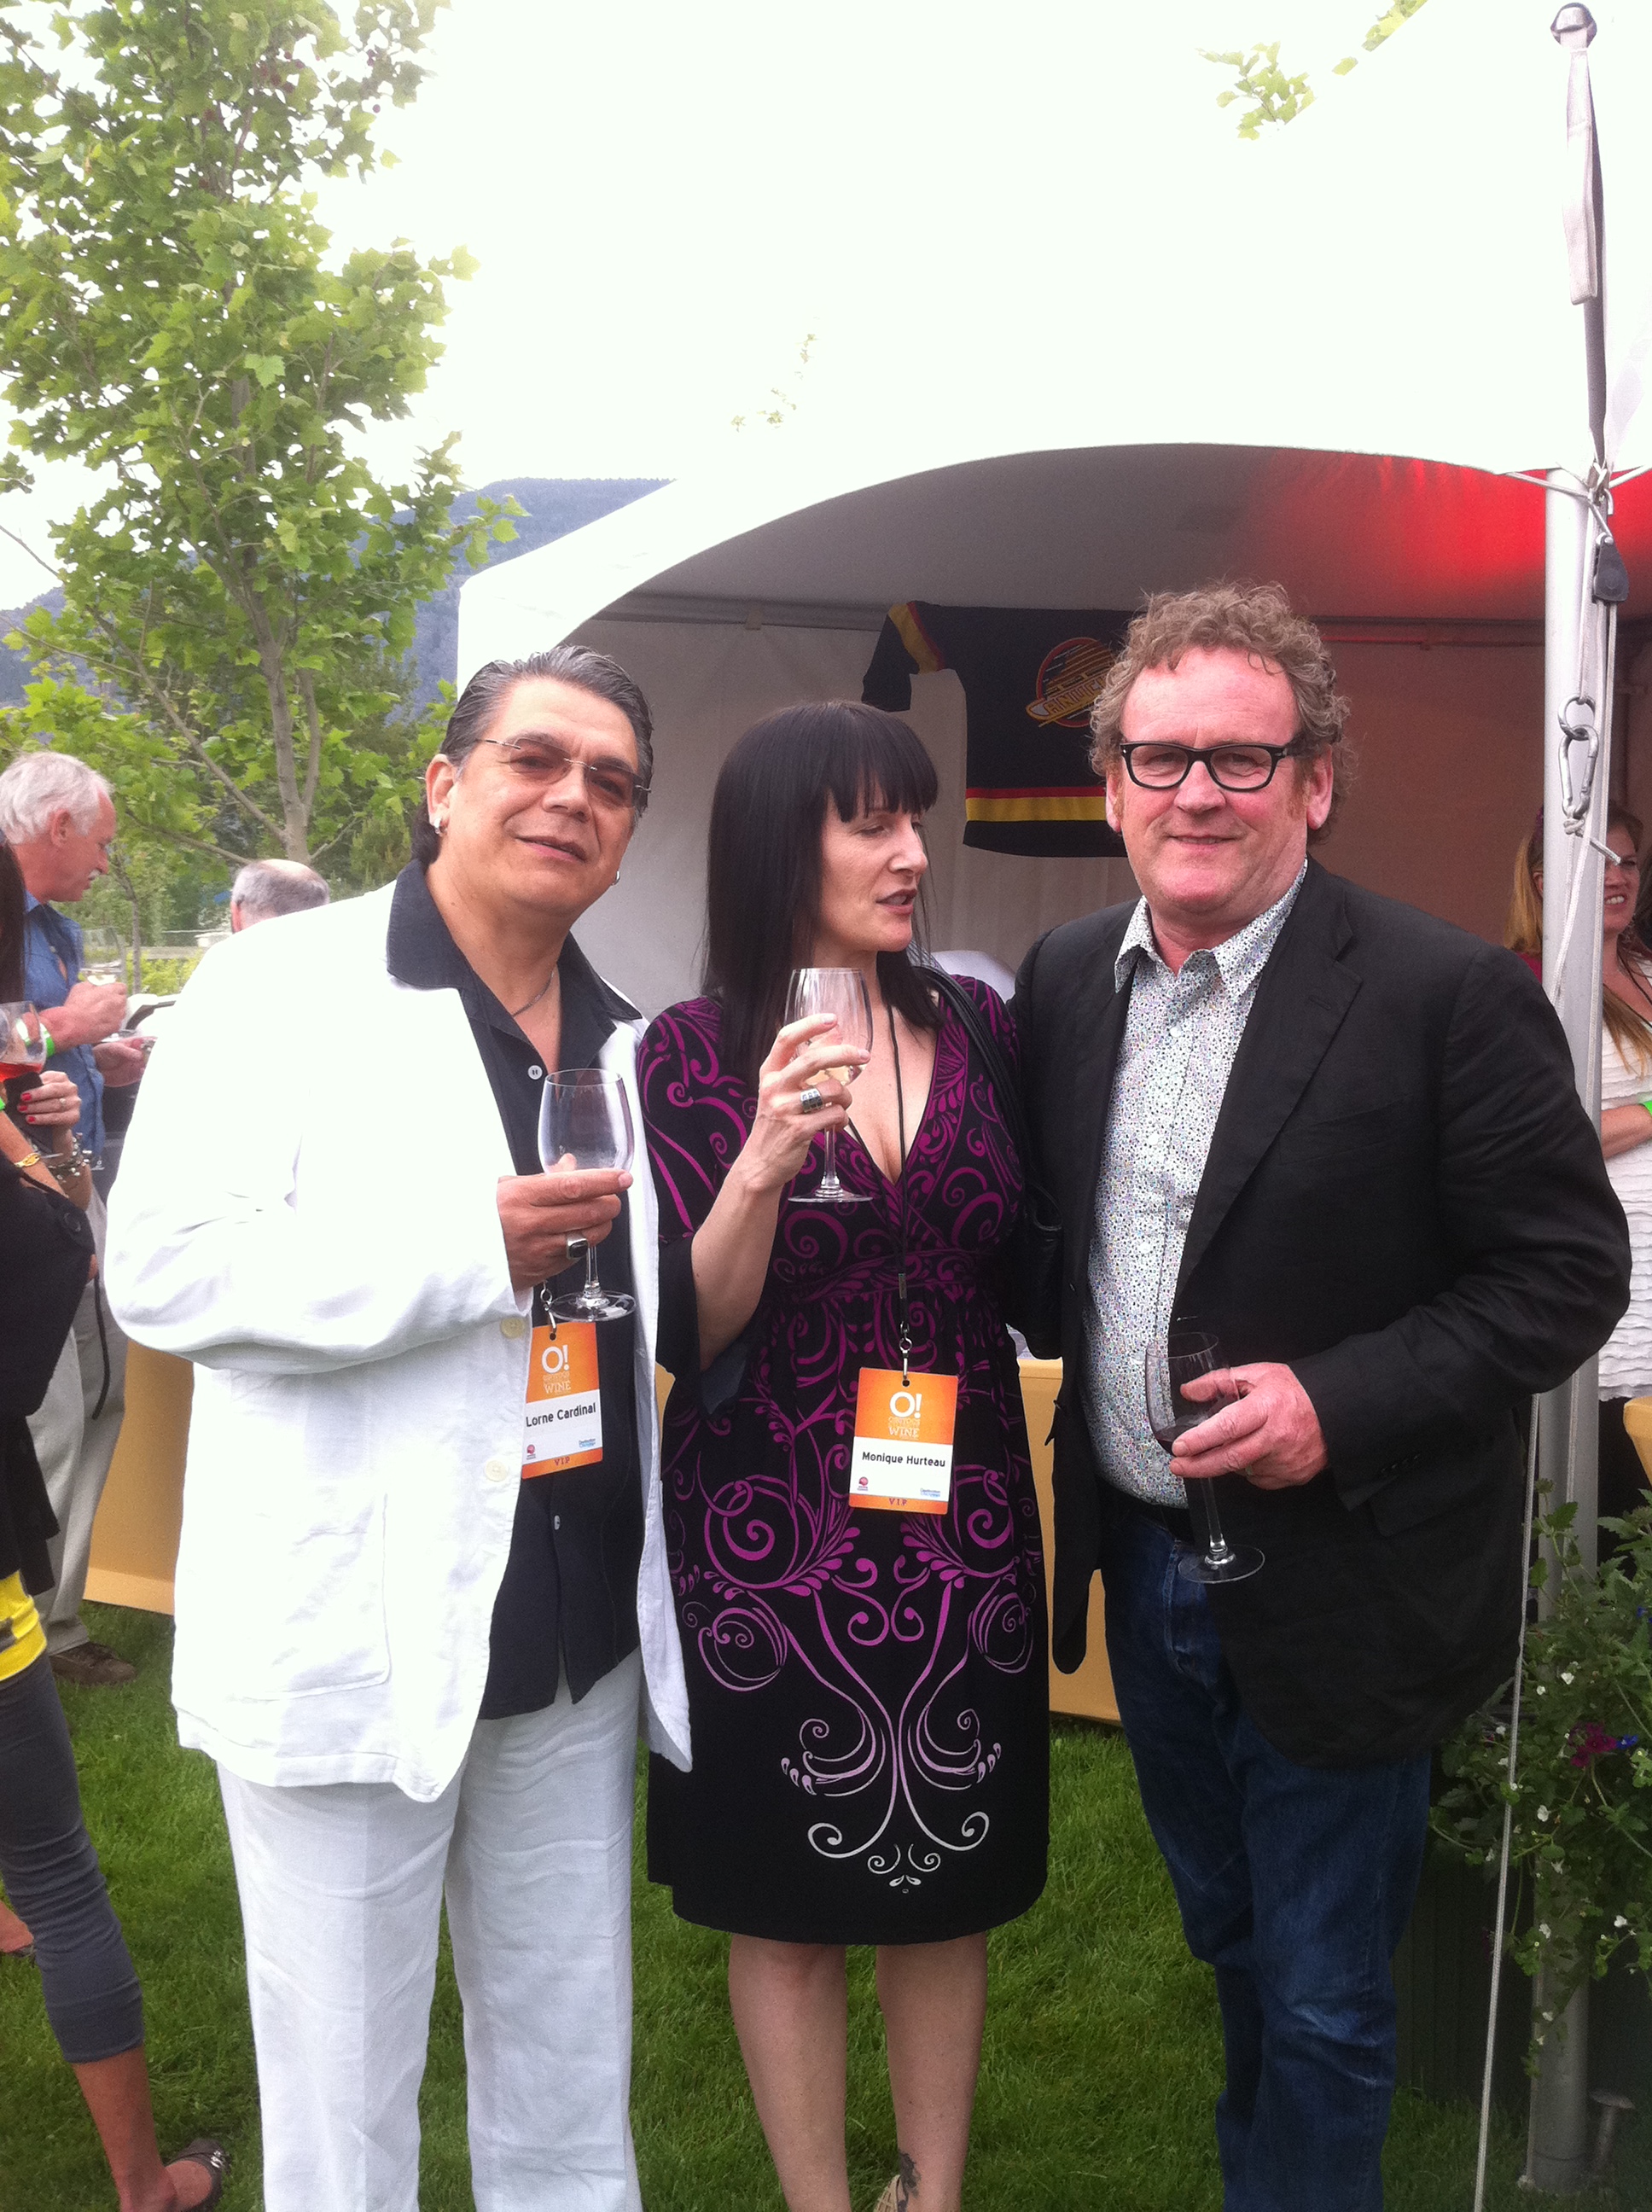 Lorne Cardinal, Monique Hurteau and Colm Meaney at the 2011 Osoyoos Celebrity Wine Festival co-hosted by Jason Priestly & Chad Oakes